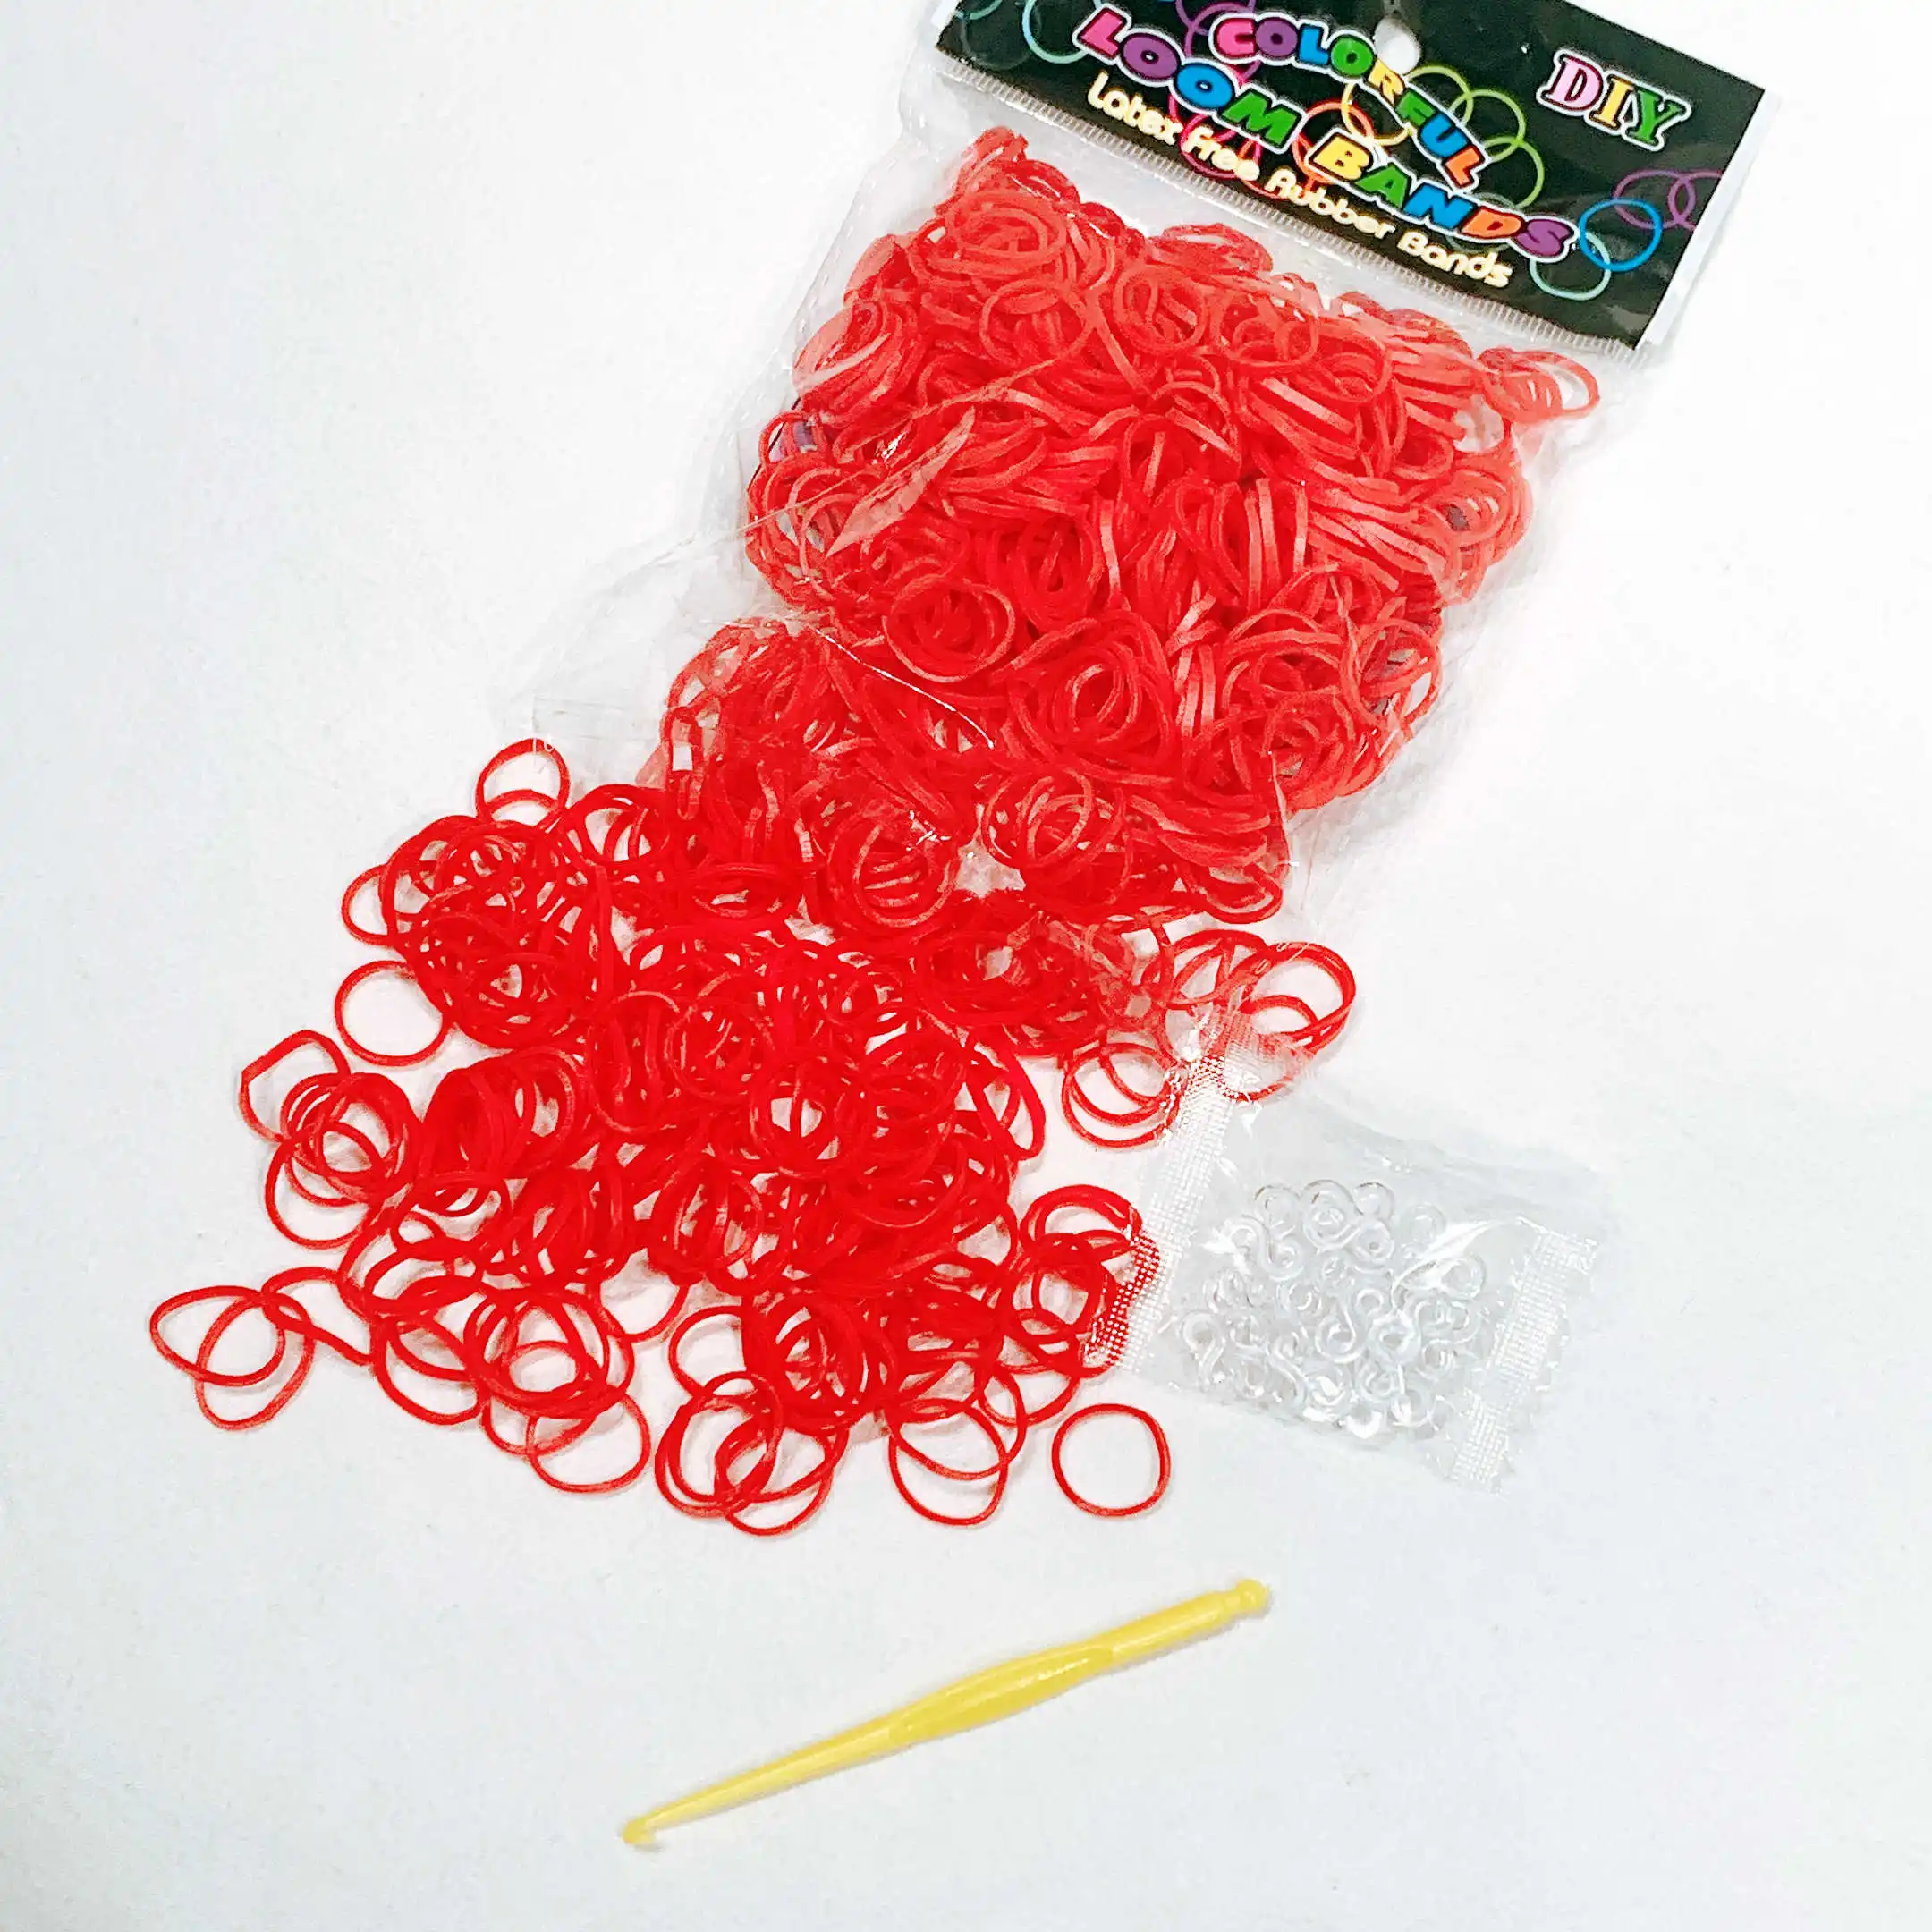 600PCS High Quality Thicken Small Disposable Hair Bands Scrunchie Girls Elastic Rubber Band Ponytail Holder Hair Accessories